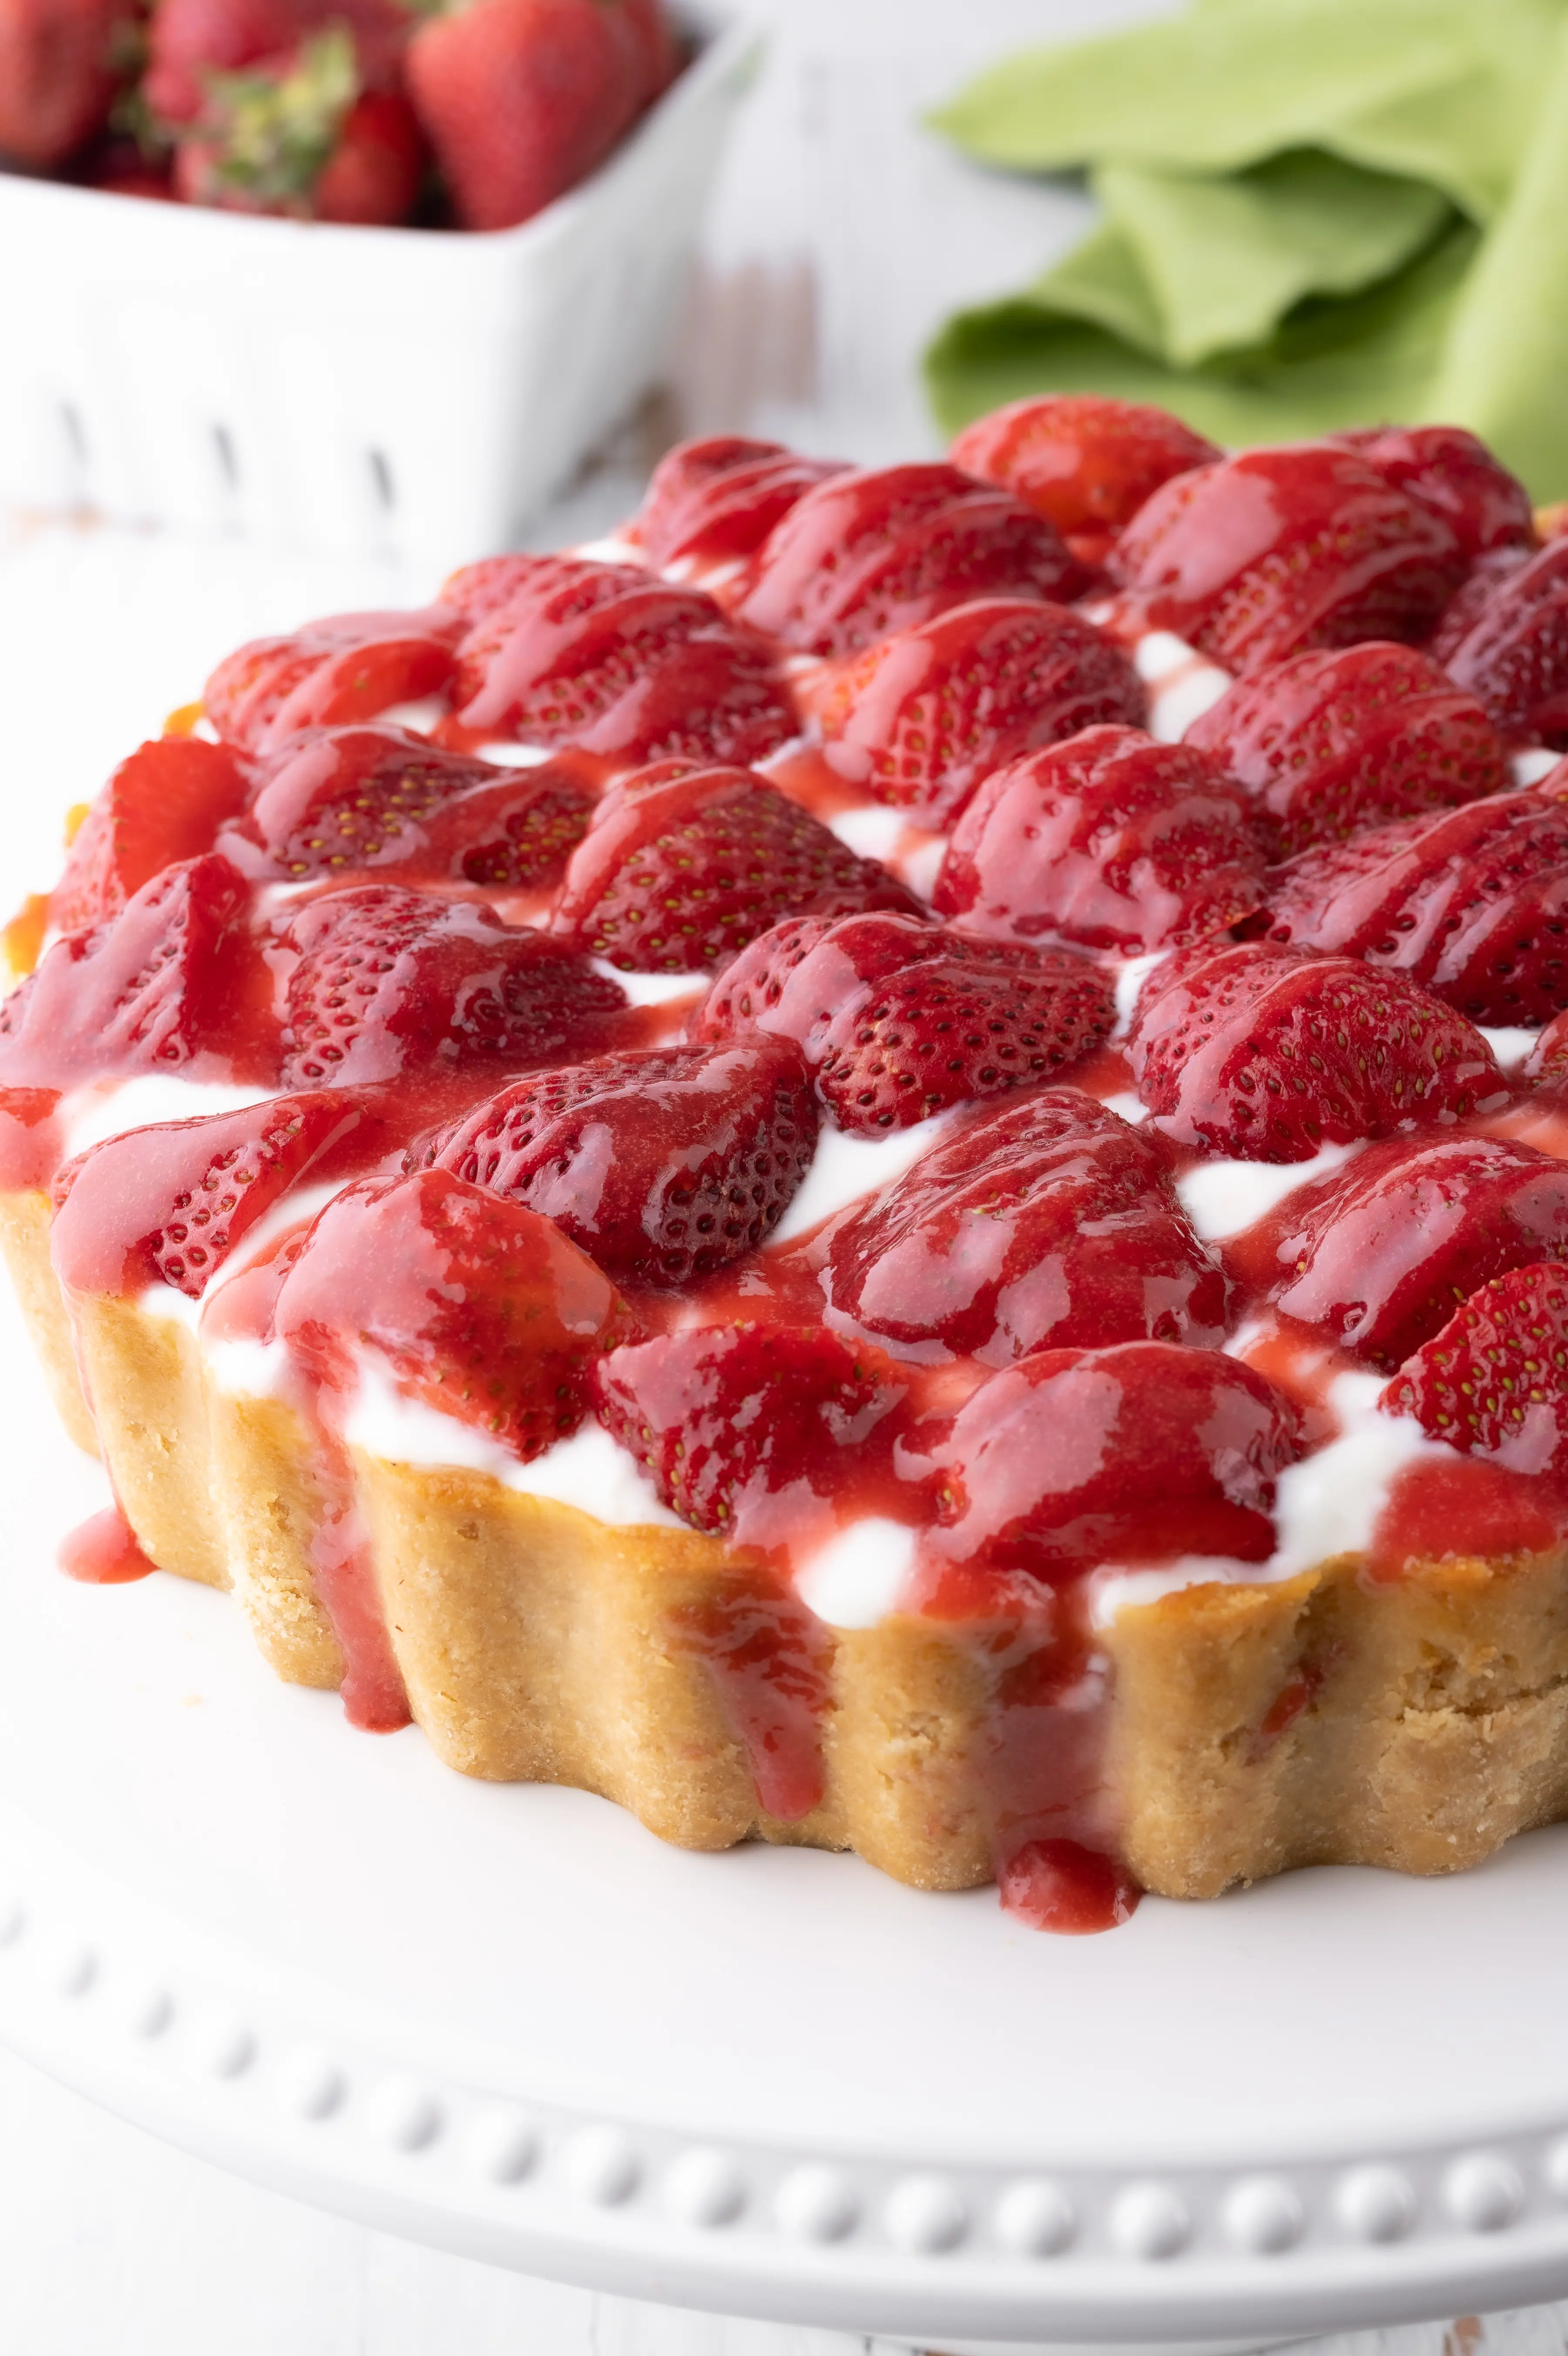 Keto strawberry cheesecake with fresh strawberries and drizzled with strawberry sauce.  The cheesecake rests on a bright white cake stand. 